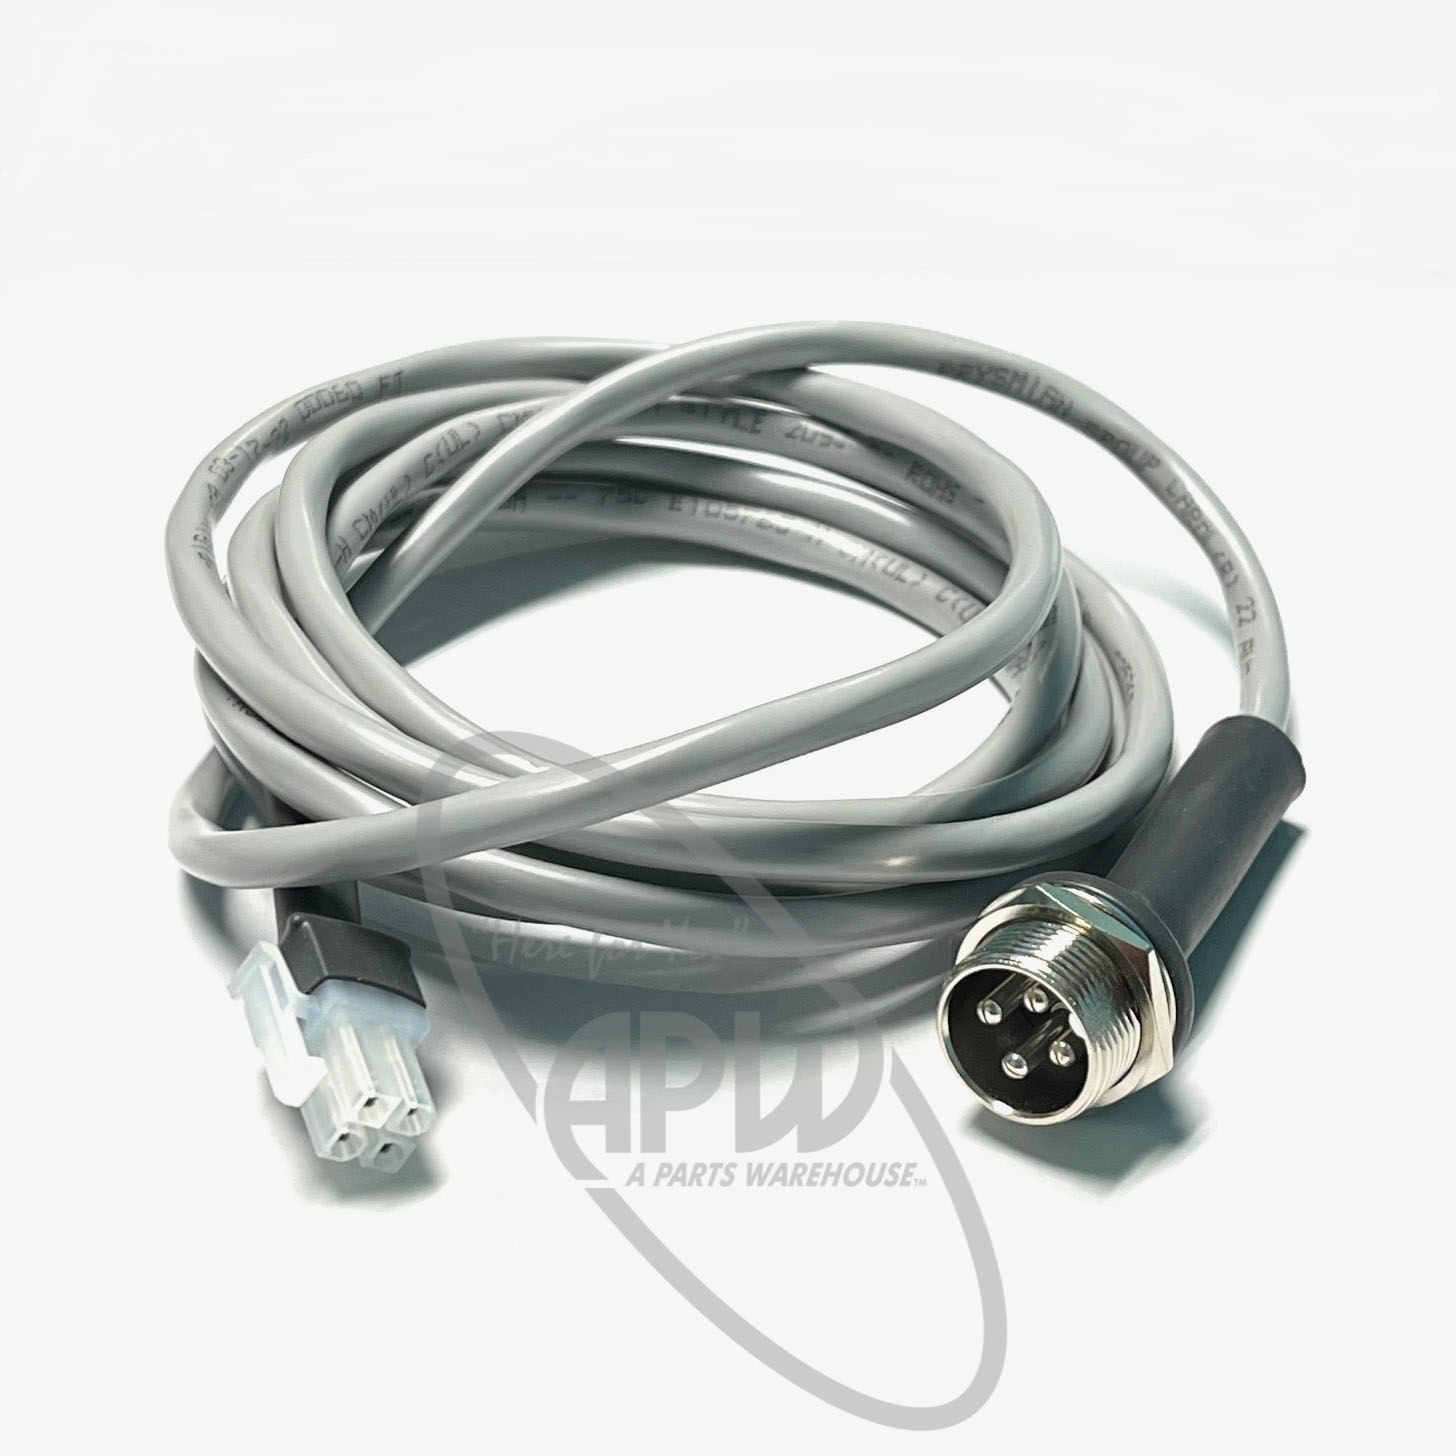 Microphone Cable Extension, School Bus Parts for Sale